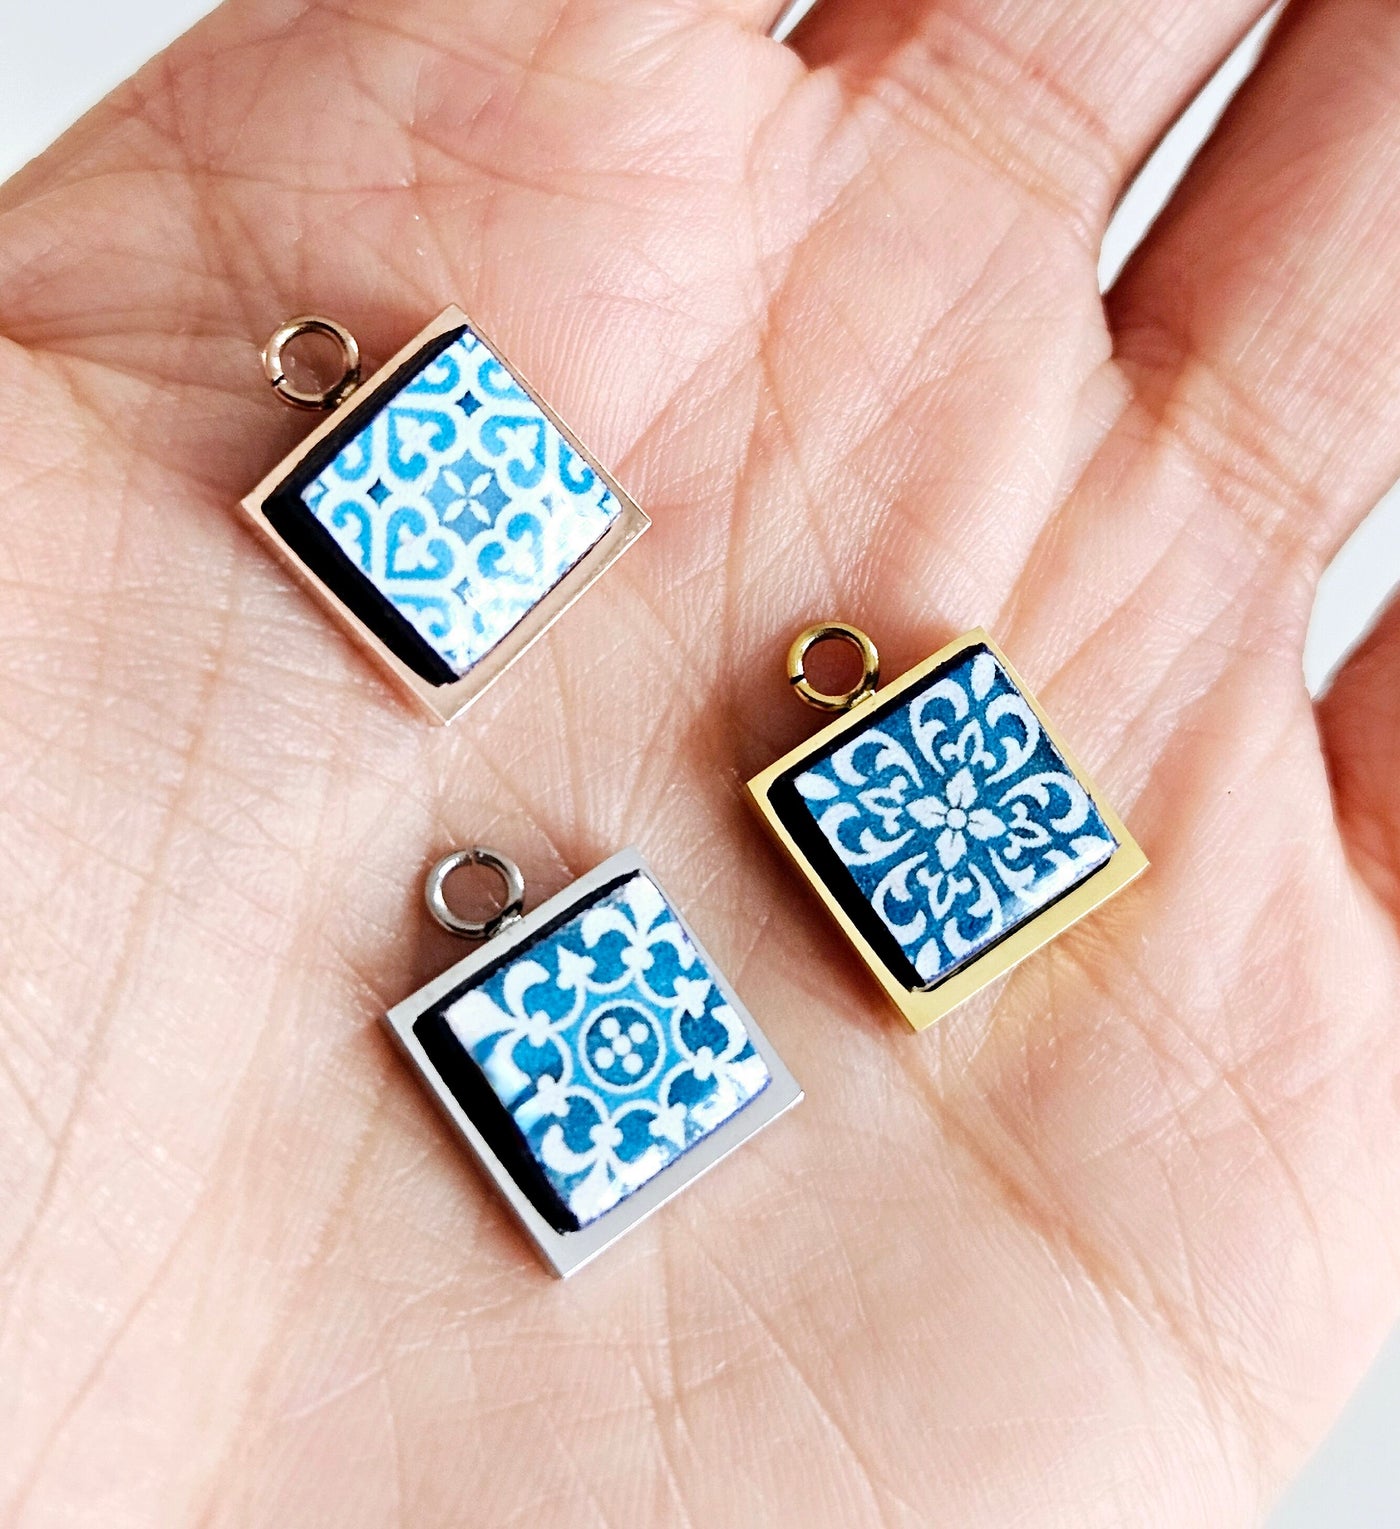 1PC Charm Portuguese Tile 12mm Azulejo Square Stainless Steel DIY Handmade Tile Jewelry Making Craft Supply Earring Bracelet Gift Charm